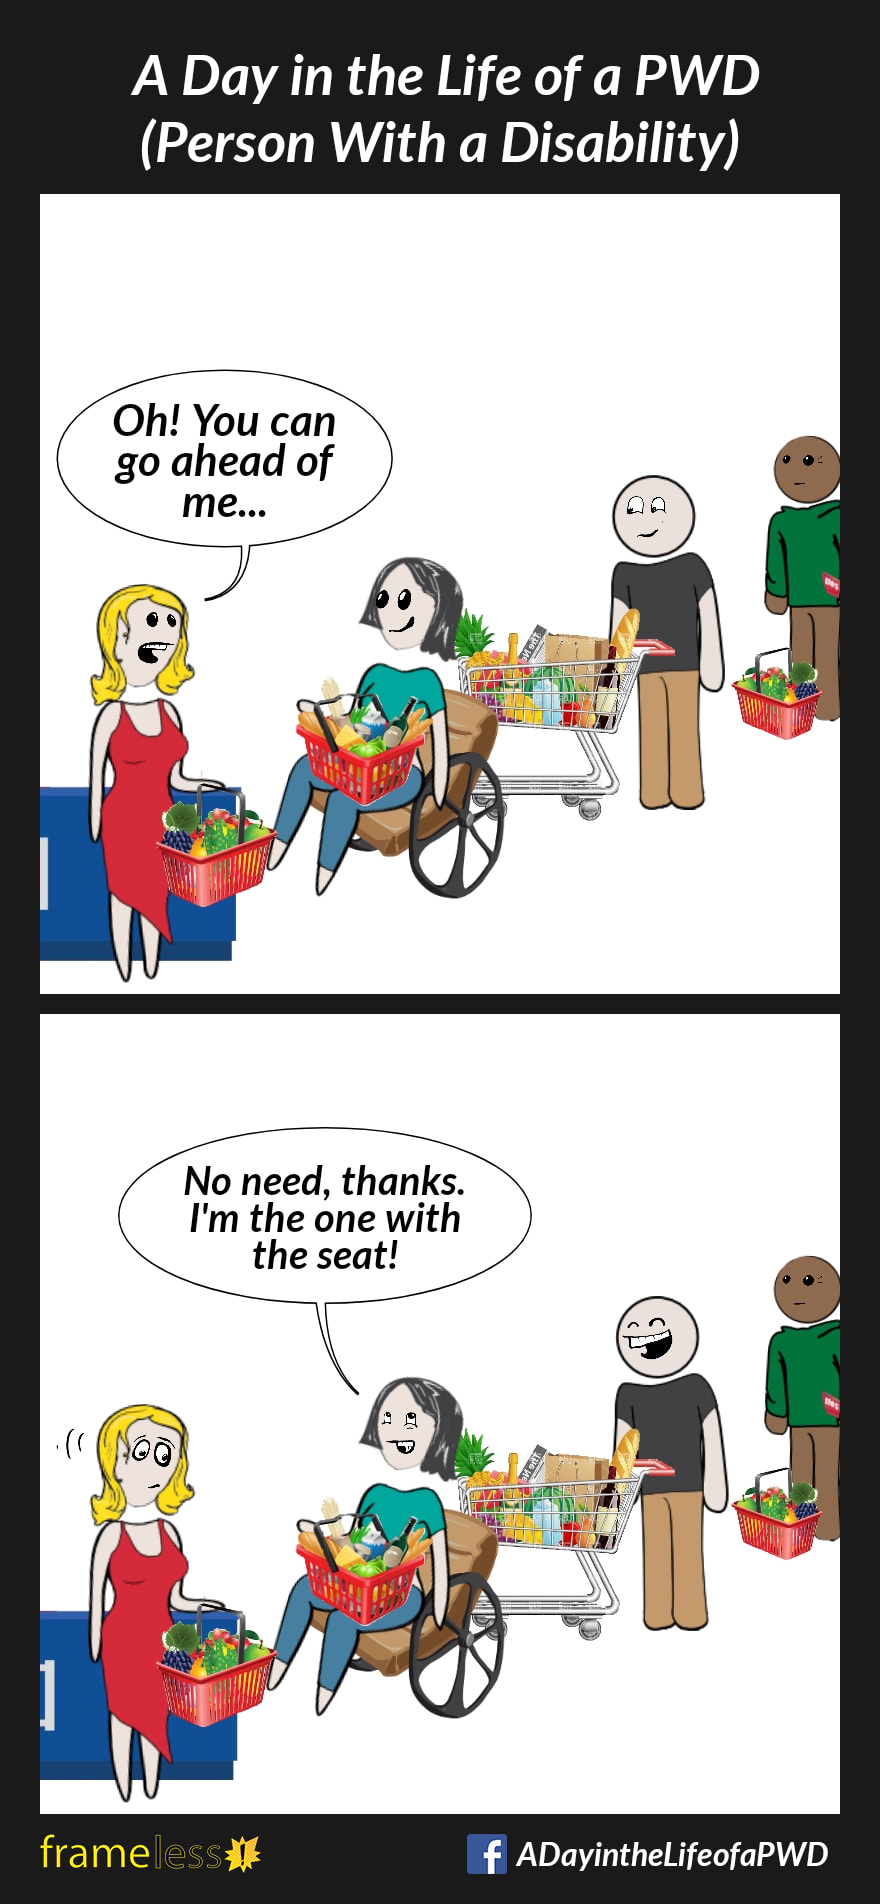 COMIC STRIP 
A Day in the Life of a PWD (Person With a Disability) 

Frame 1:
A woman in a wheelchair with a full basket in her lap waits in a checkout line in a grocery store.
The shopper in front of her, who is also carrying a full basket, notices her.
SHOPPER: Oh! You can go ahead of me...

Frame 2:
WOMAN: No need, thanks. I'm the one with the seat!